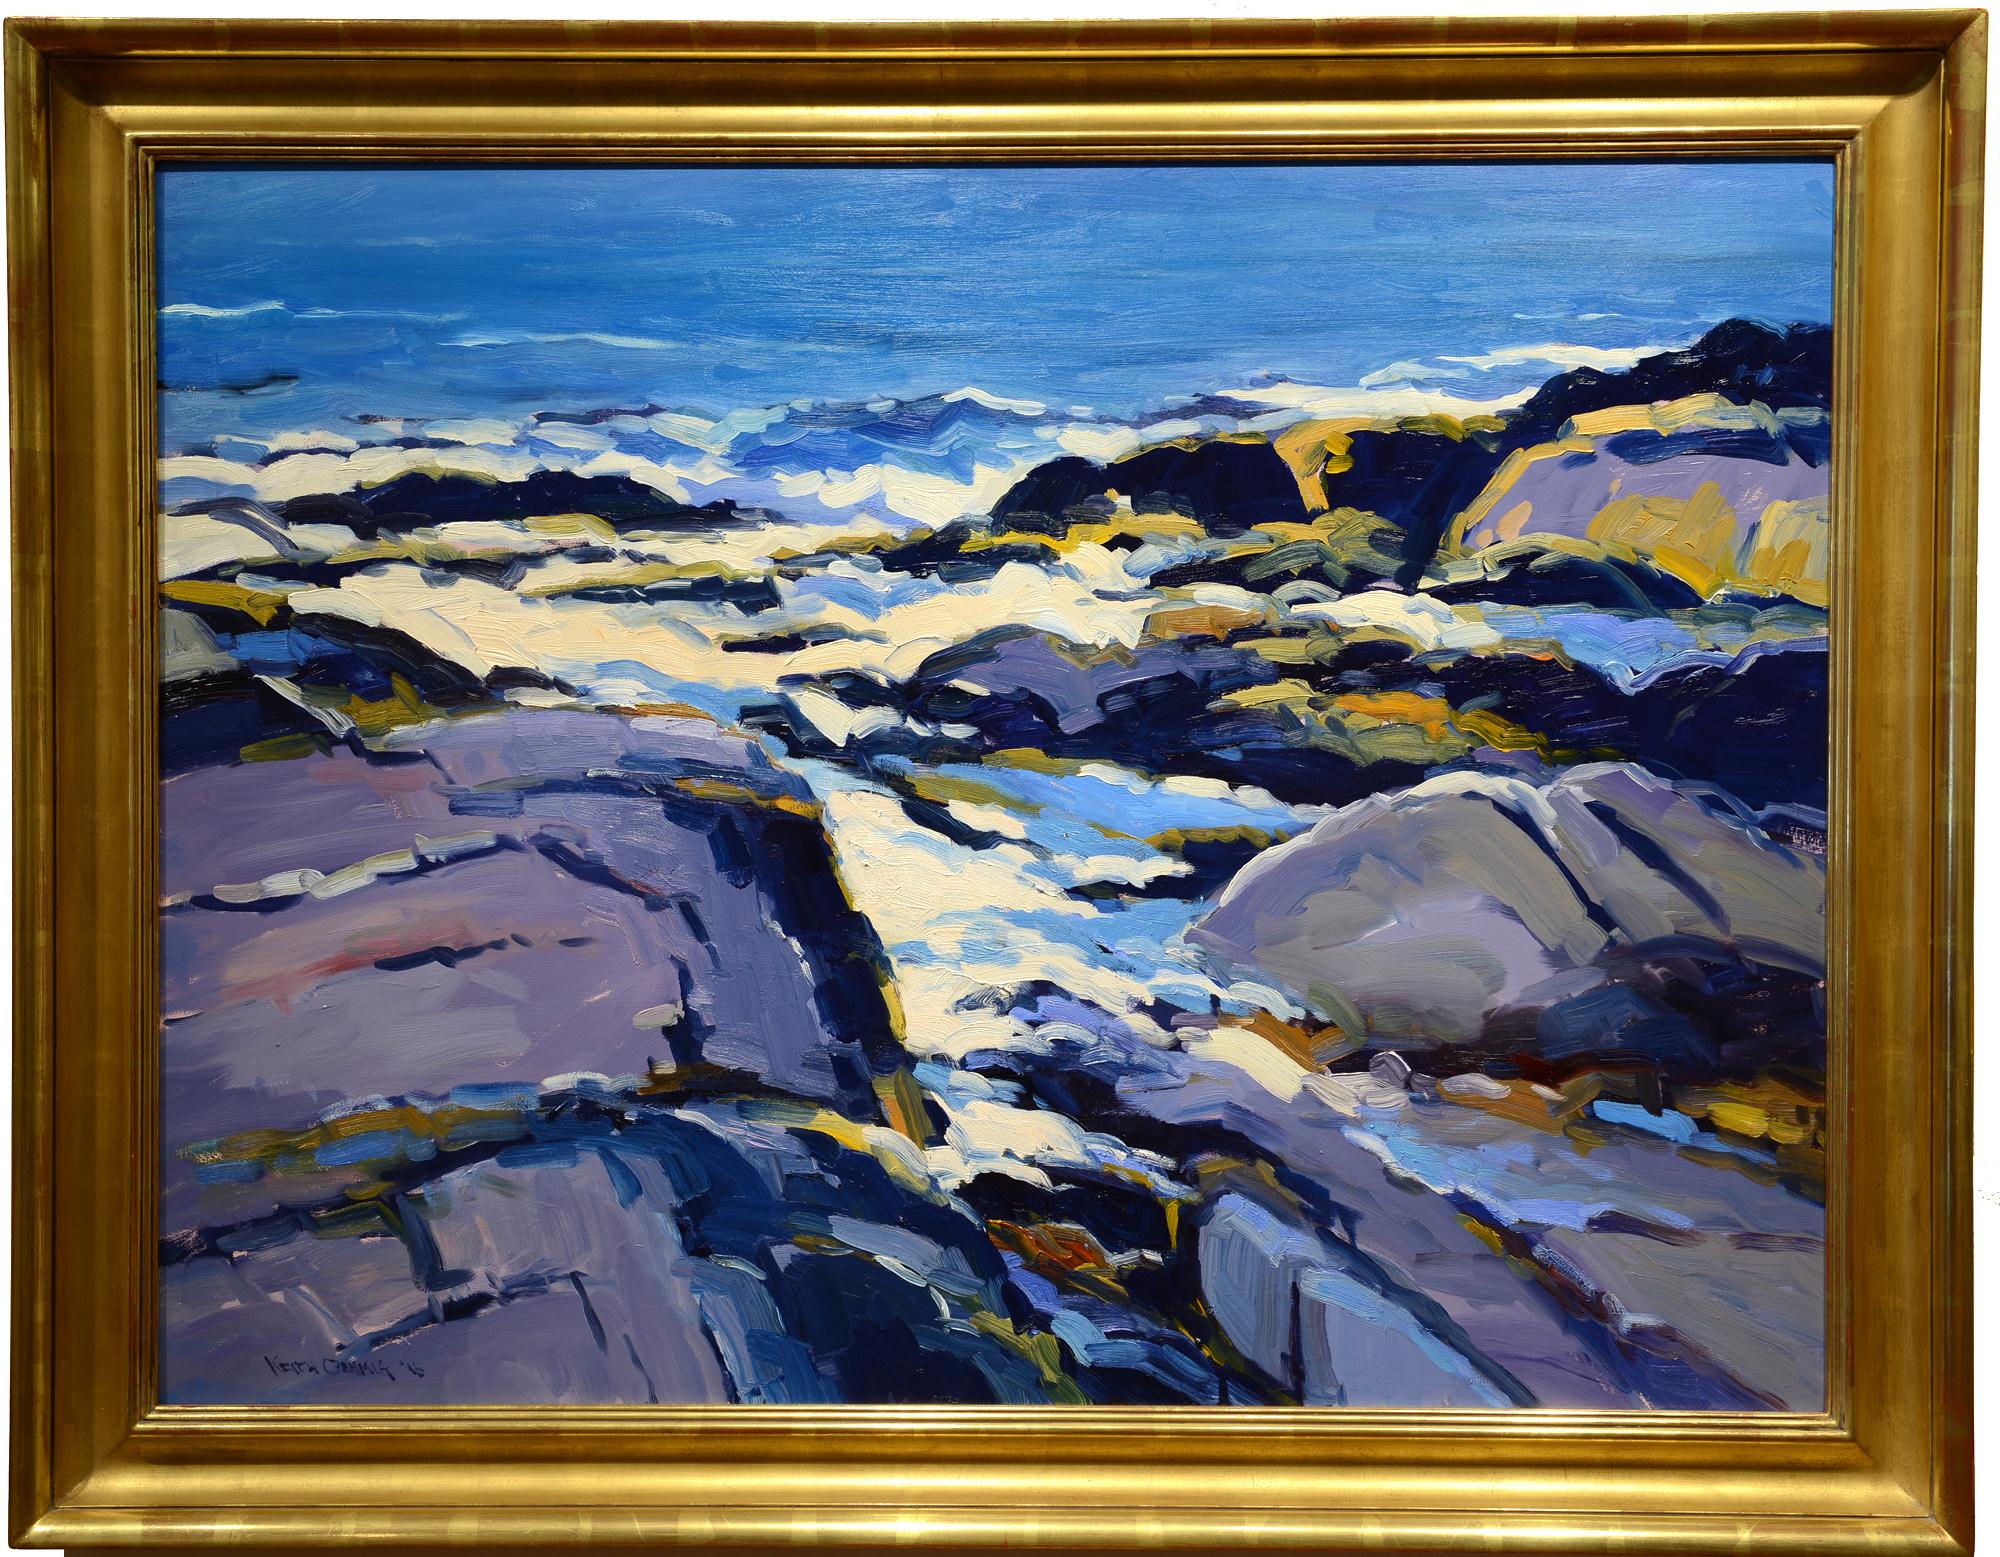 Lobster Cove, 8 a.m. - Painting by Keith Oehmig